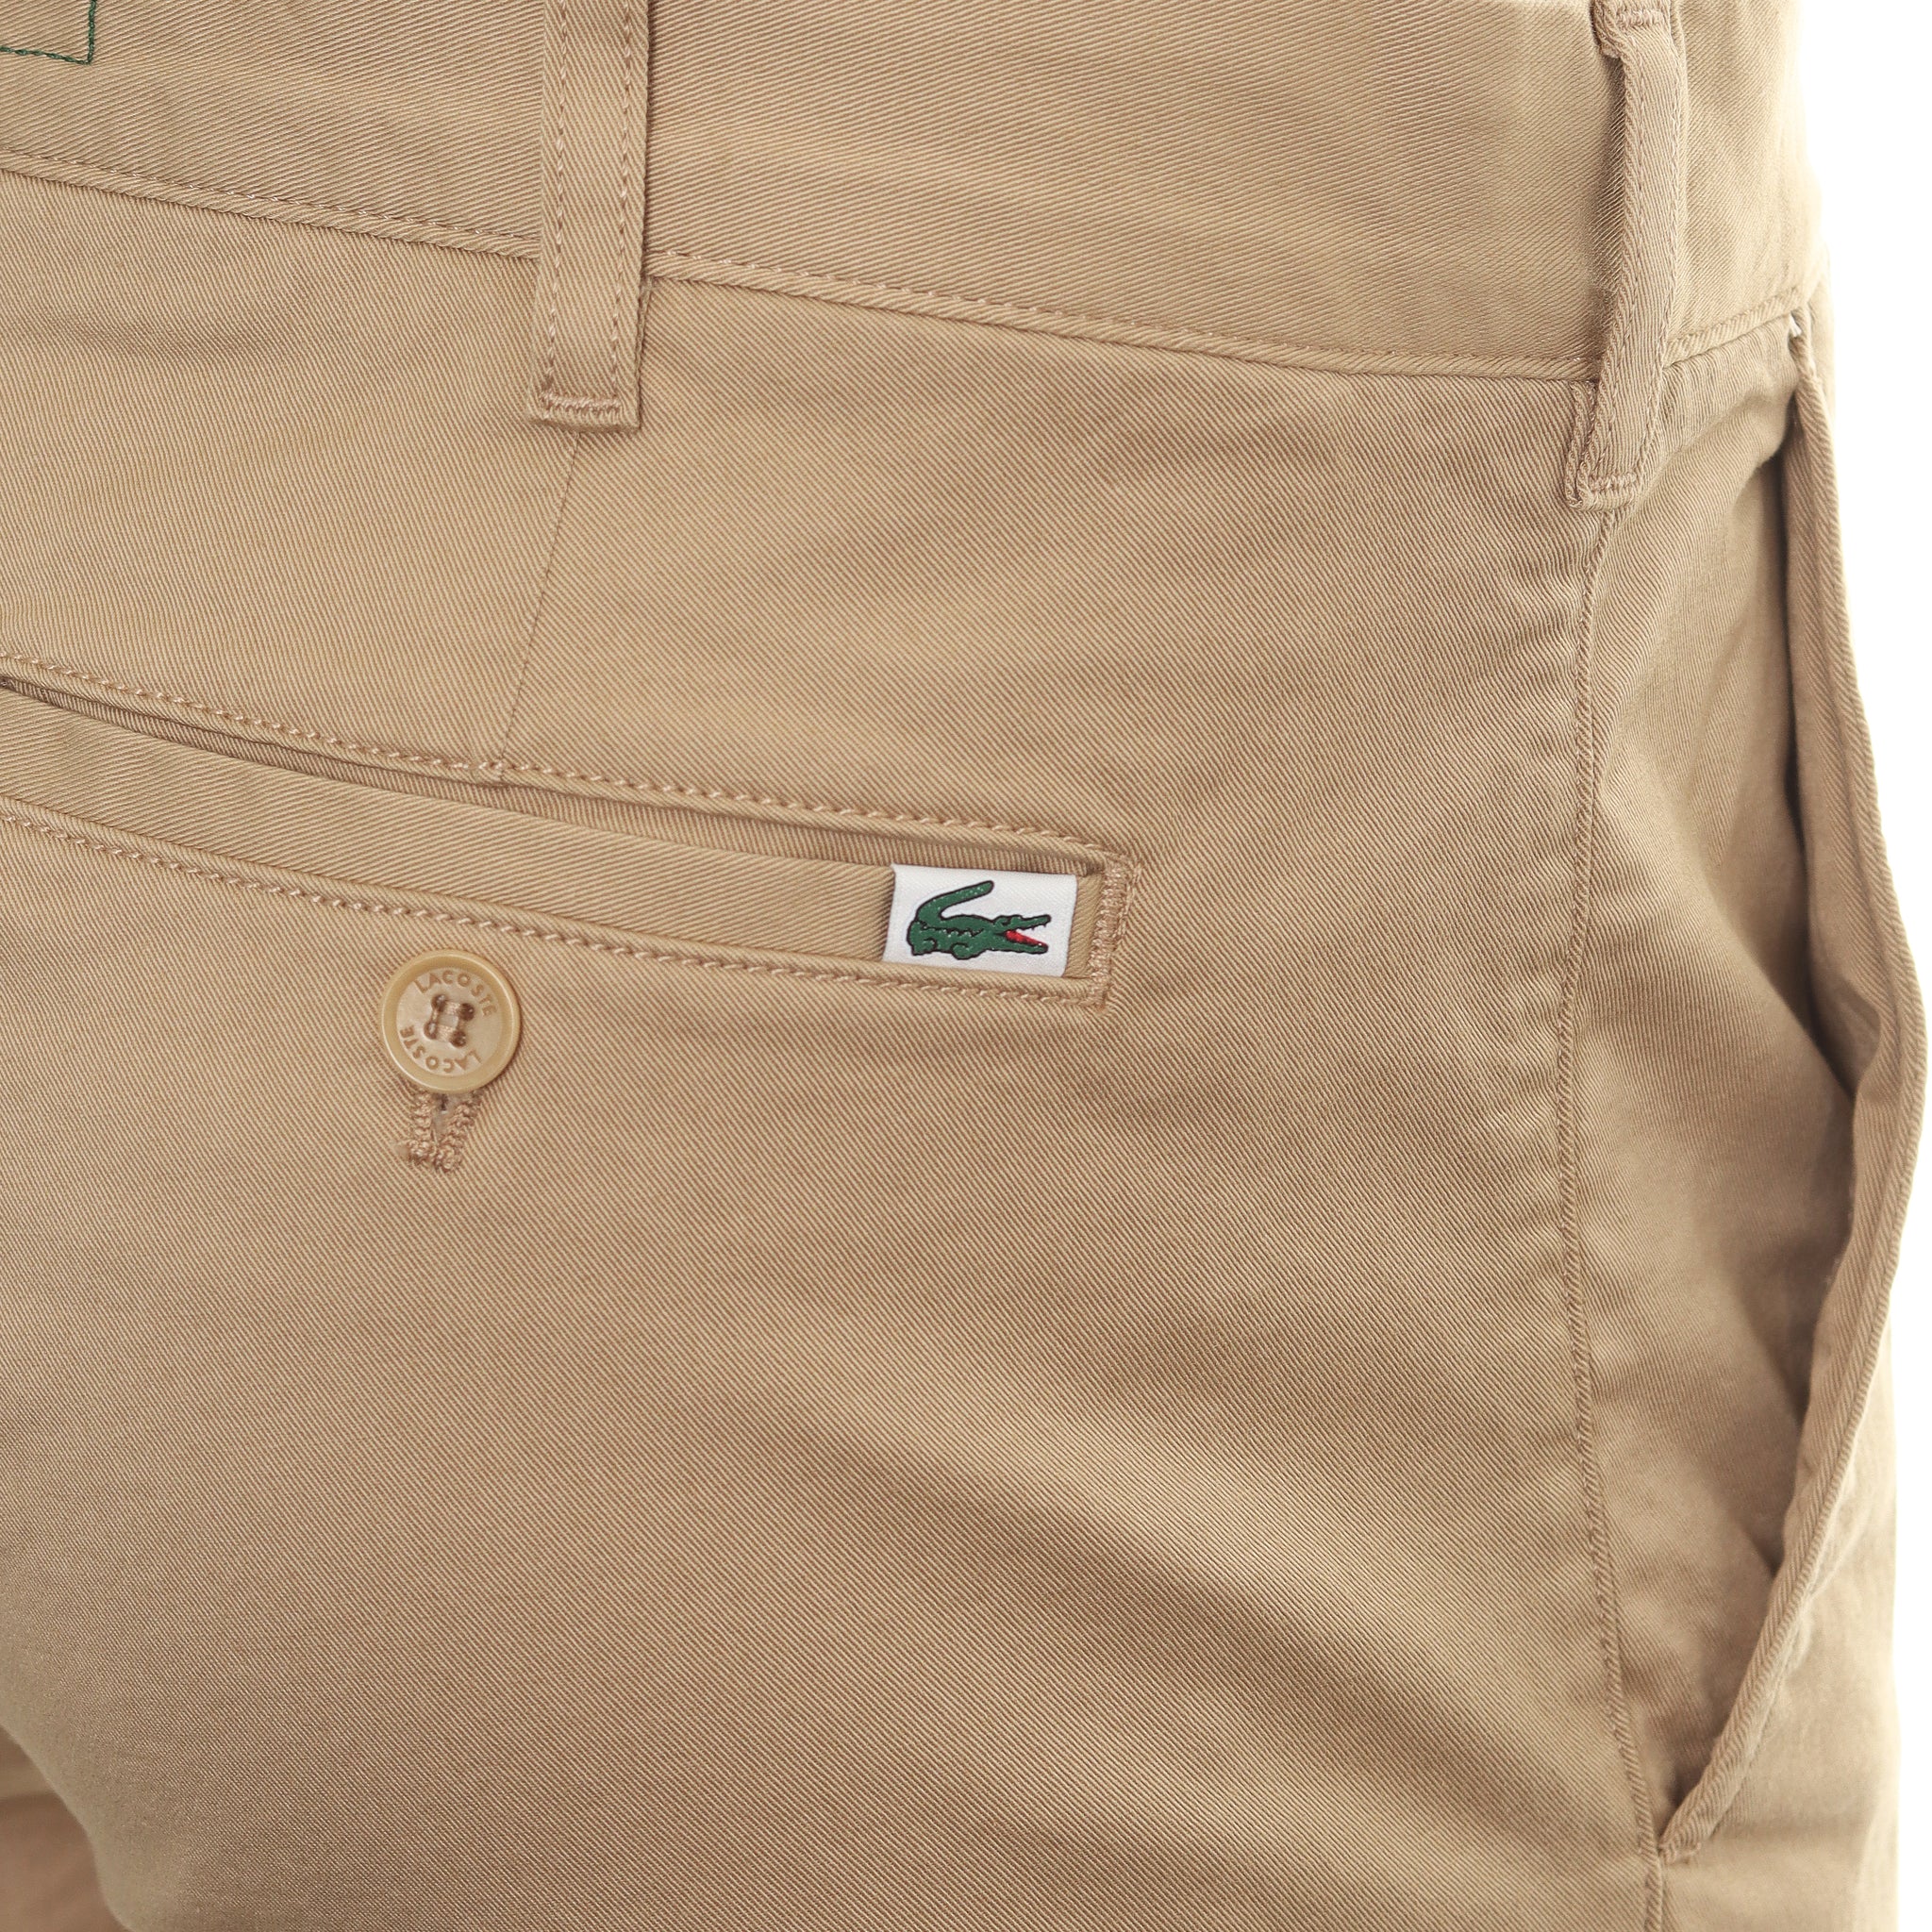 Lacoste Stretch Chino Pants